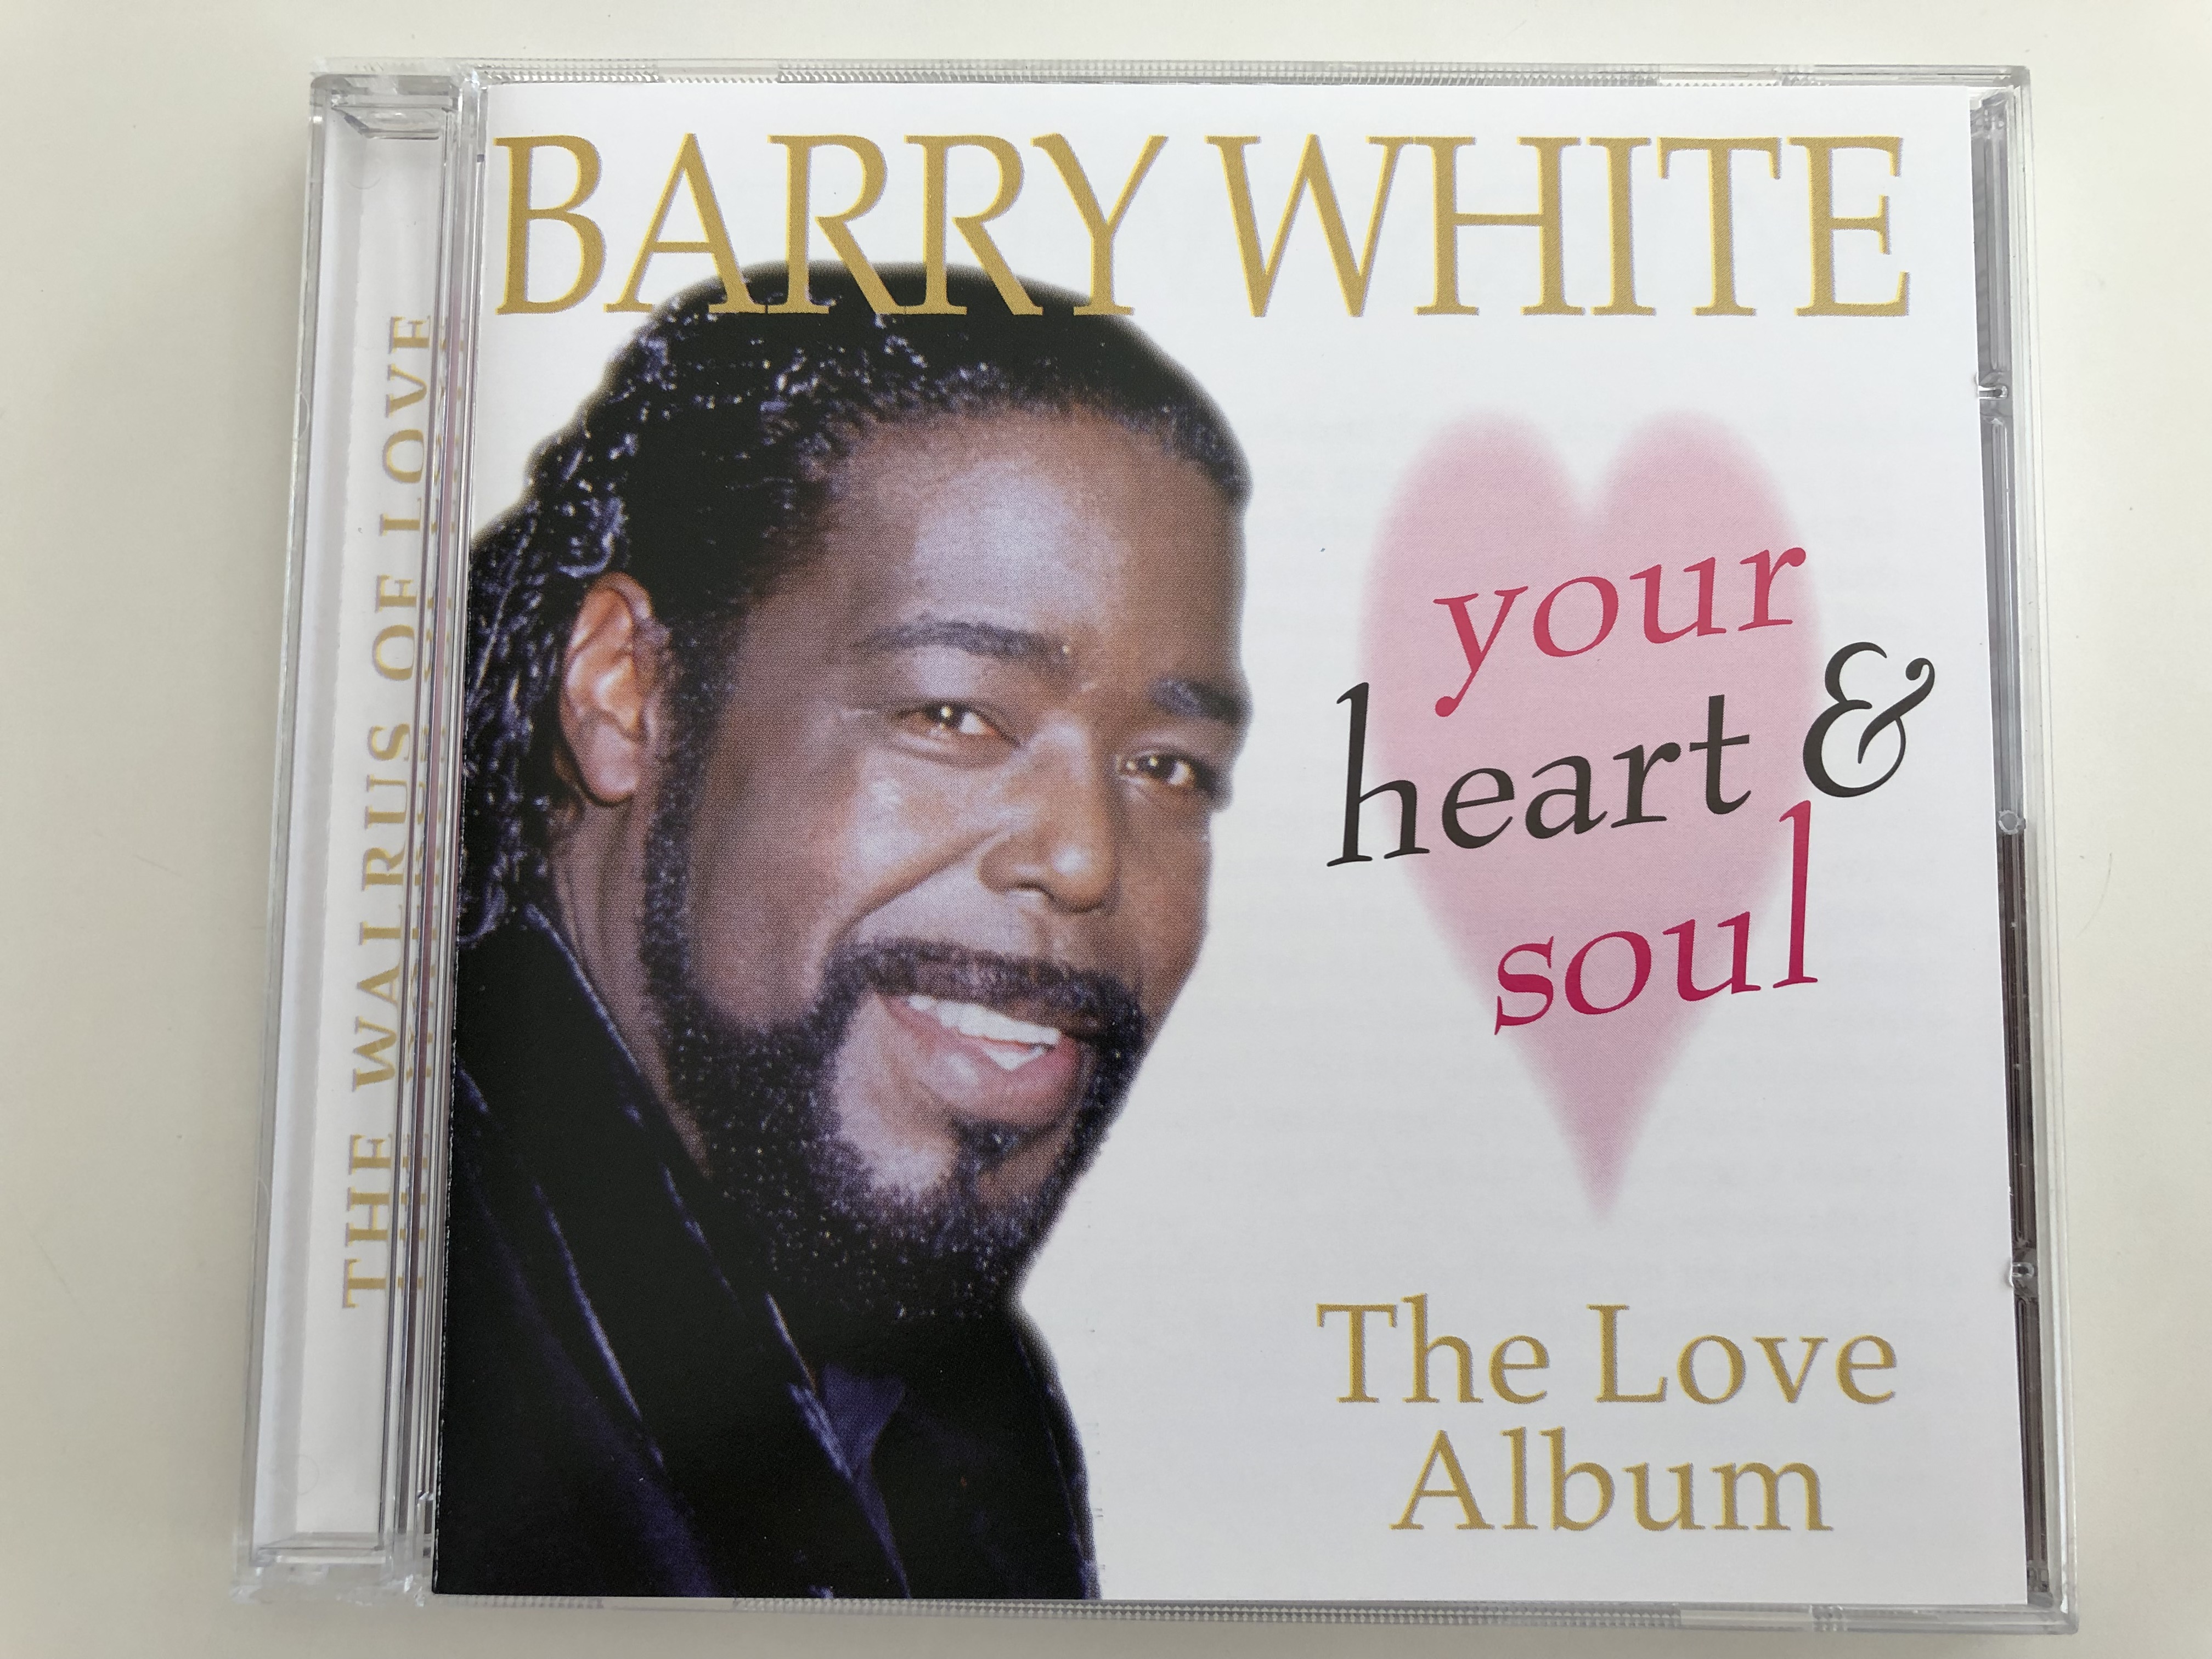 barry-white-your-heart-and-soul-the-love-album-audio-cd-1997-platcd-210-prism-leisure-1-.jpg